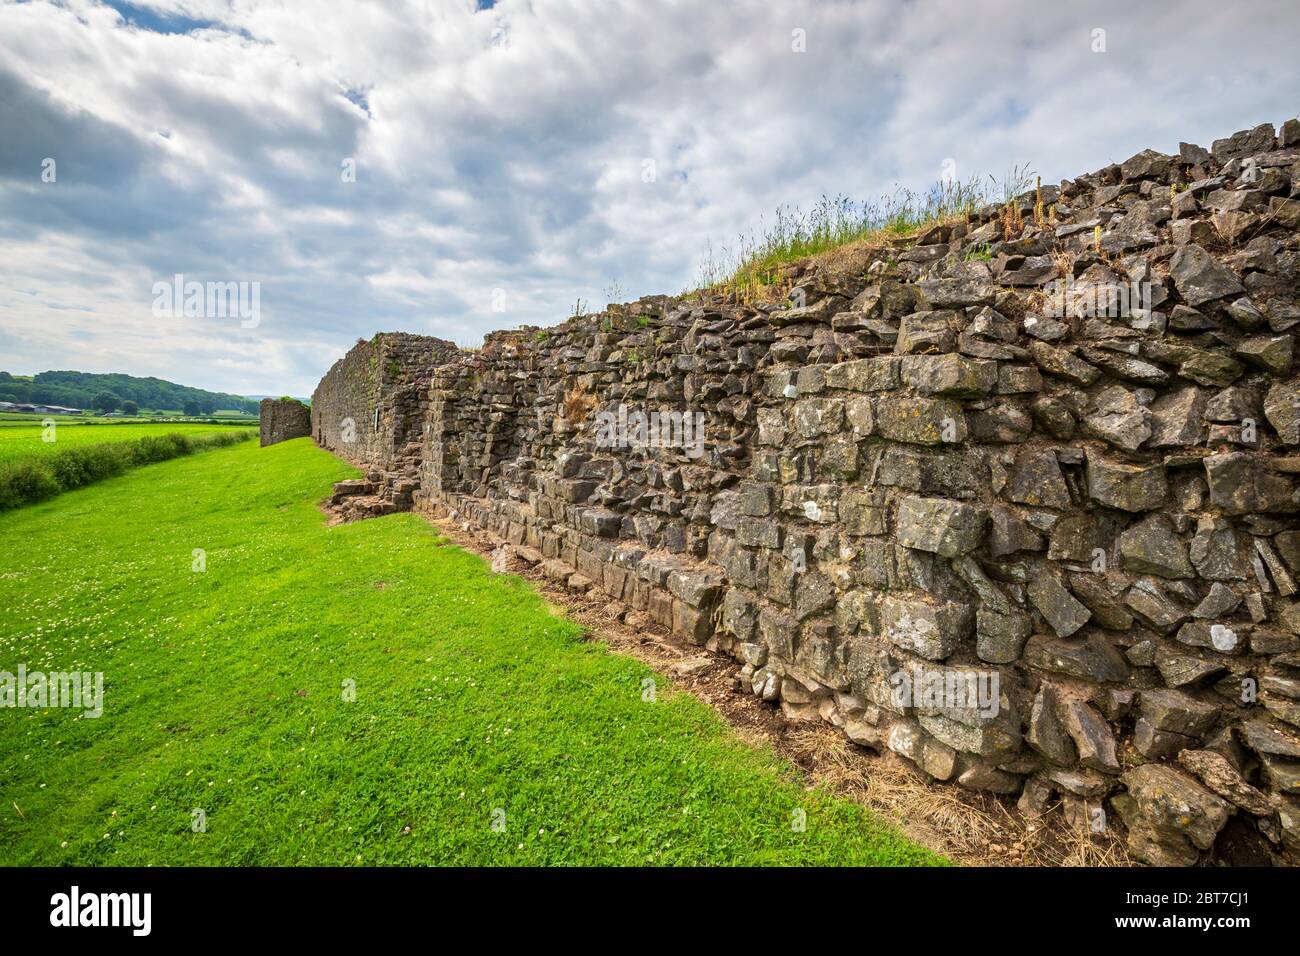 The stone blocks of the defensive south wall of the Roman Town ‘Venta Silurum’ at Caerwent, Wales Stock Photo